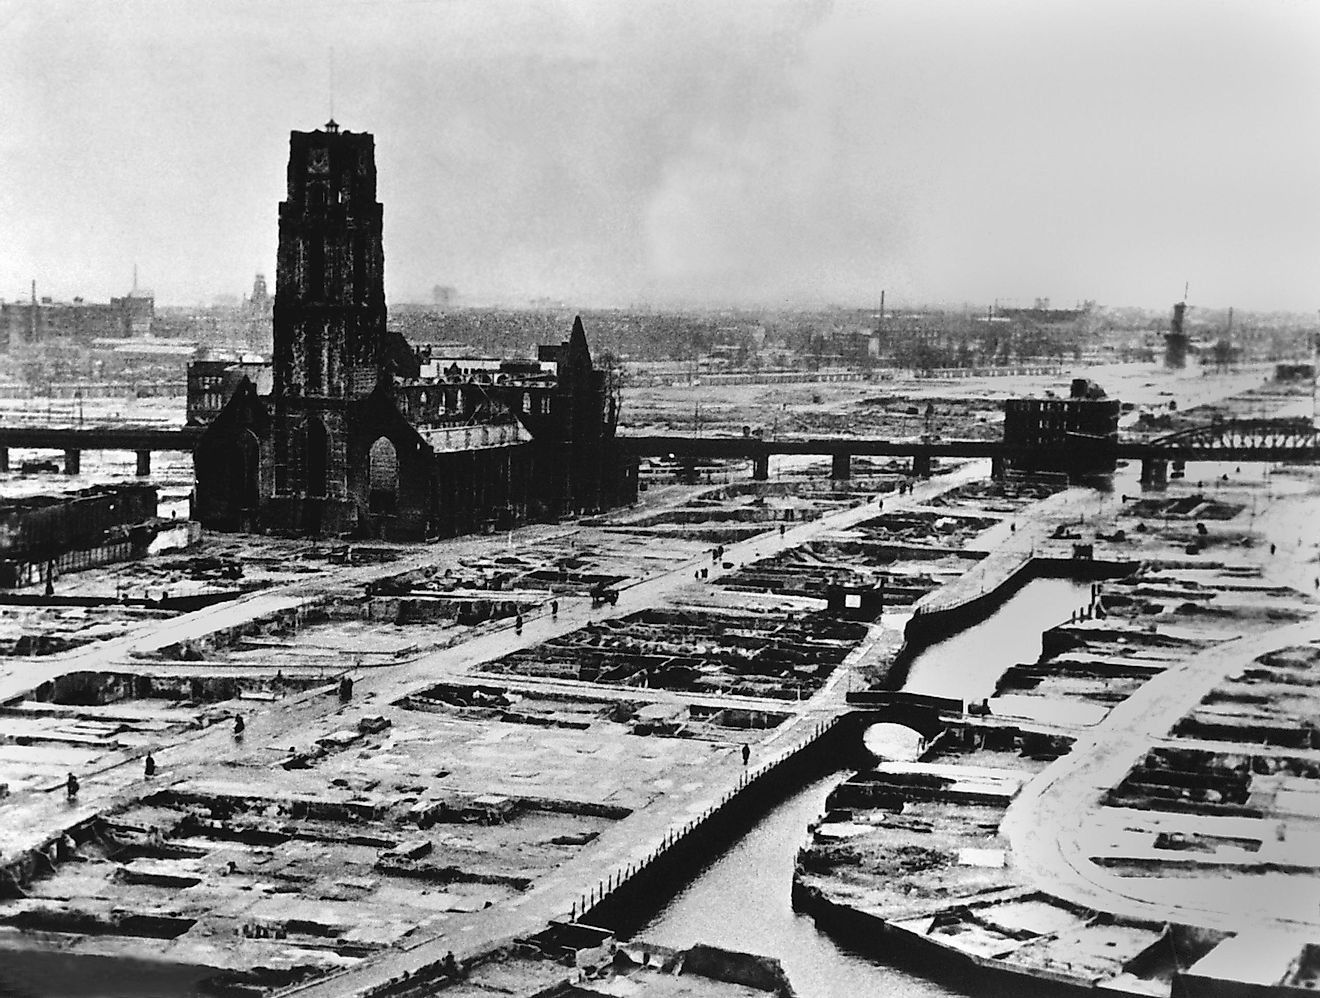 Rotterdam after the entire inner city was bombed by Germans, May 14, 1940. 30,000 civilians were killed when the Dutch defenders refused a German ultimatum to cease defense and surrender.